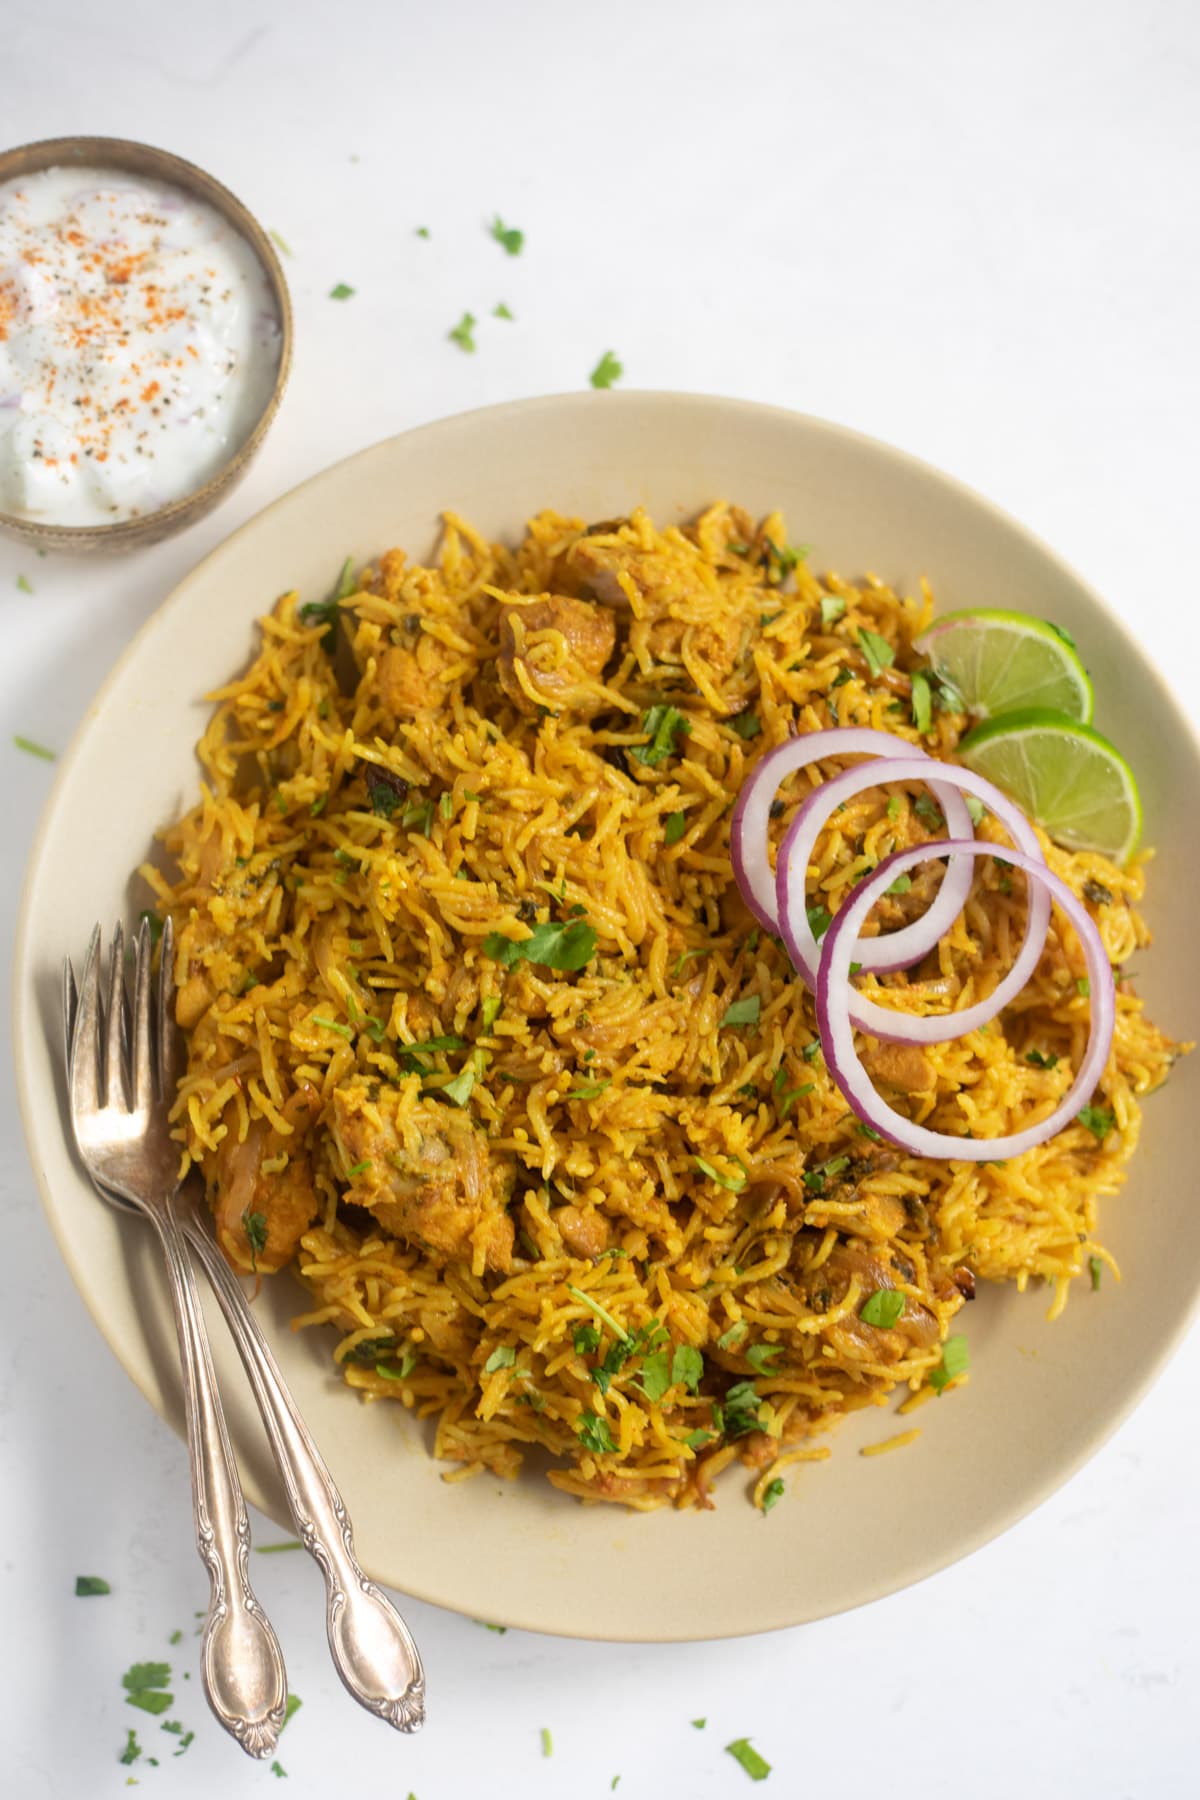 Chicken Biryani served in a plate garnished with onions, lime along with a side of raita